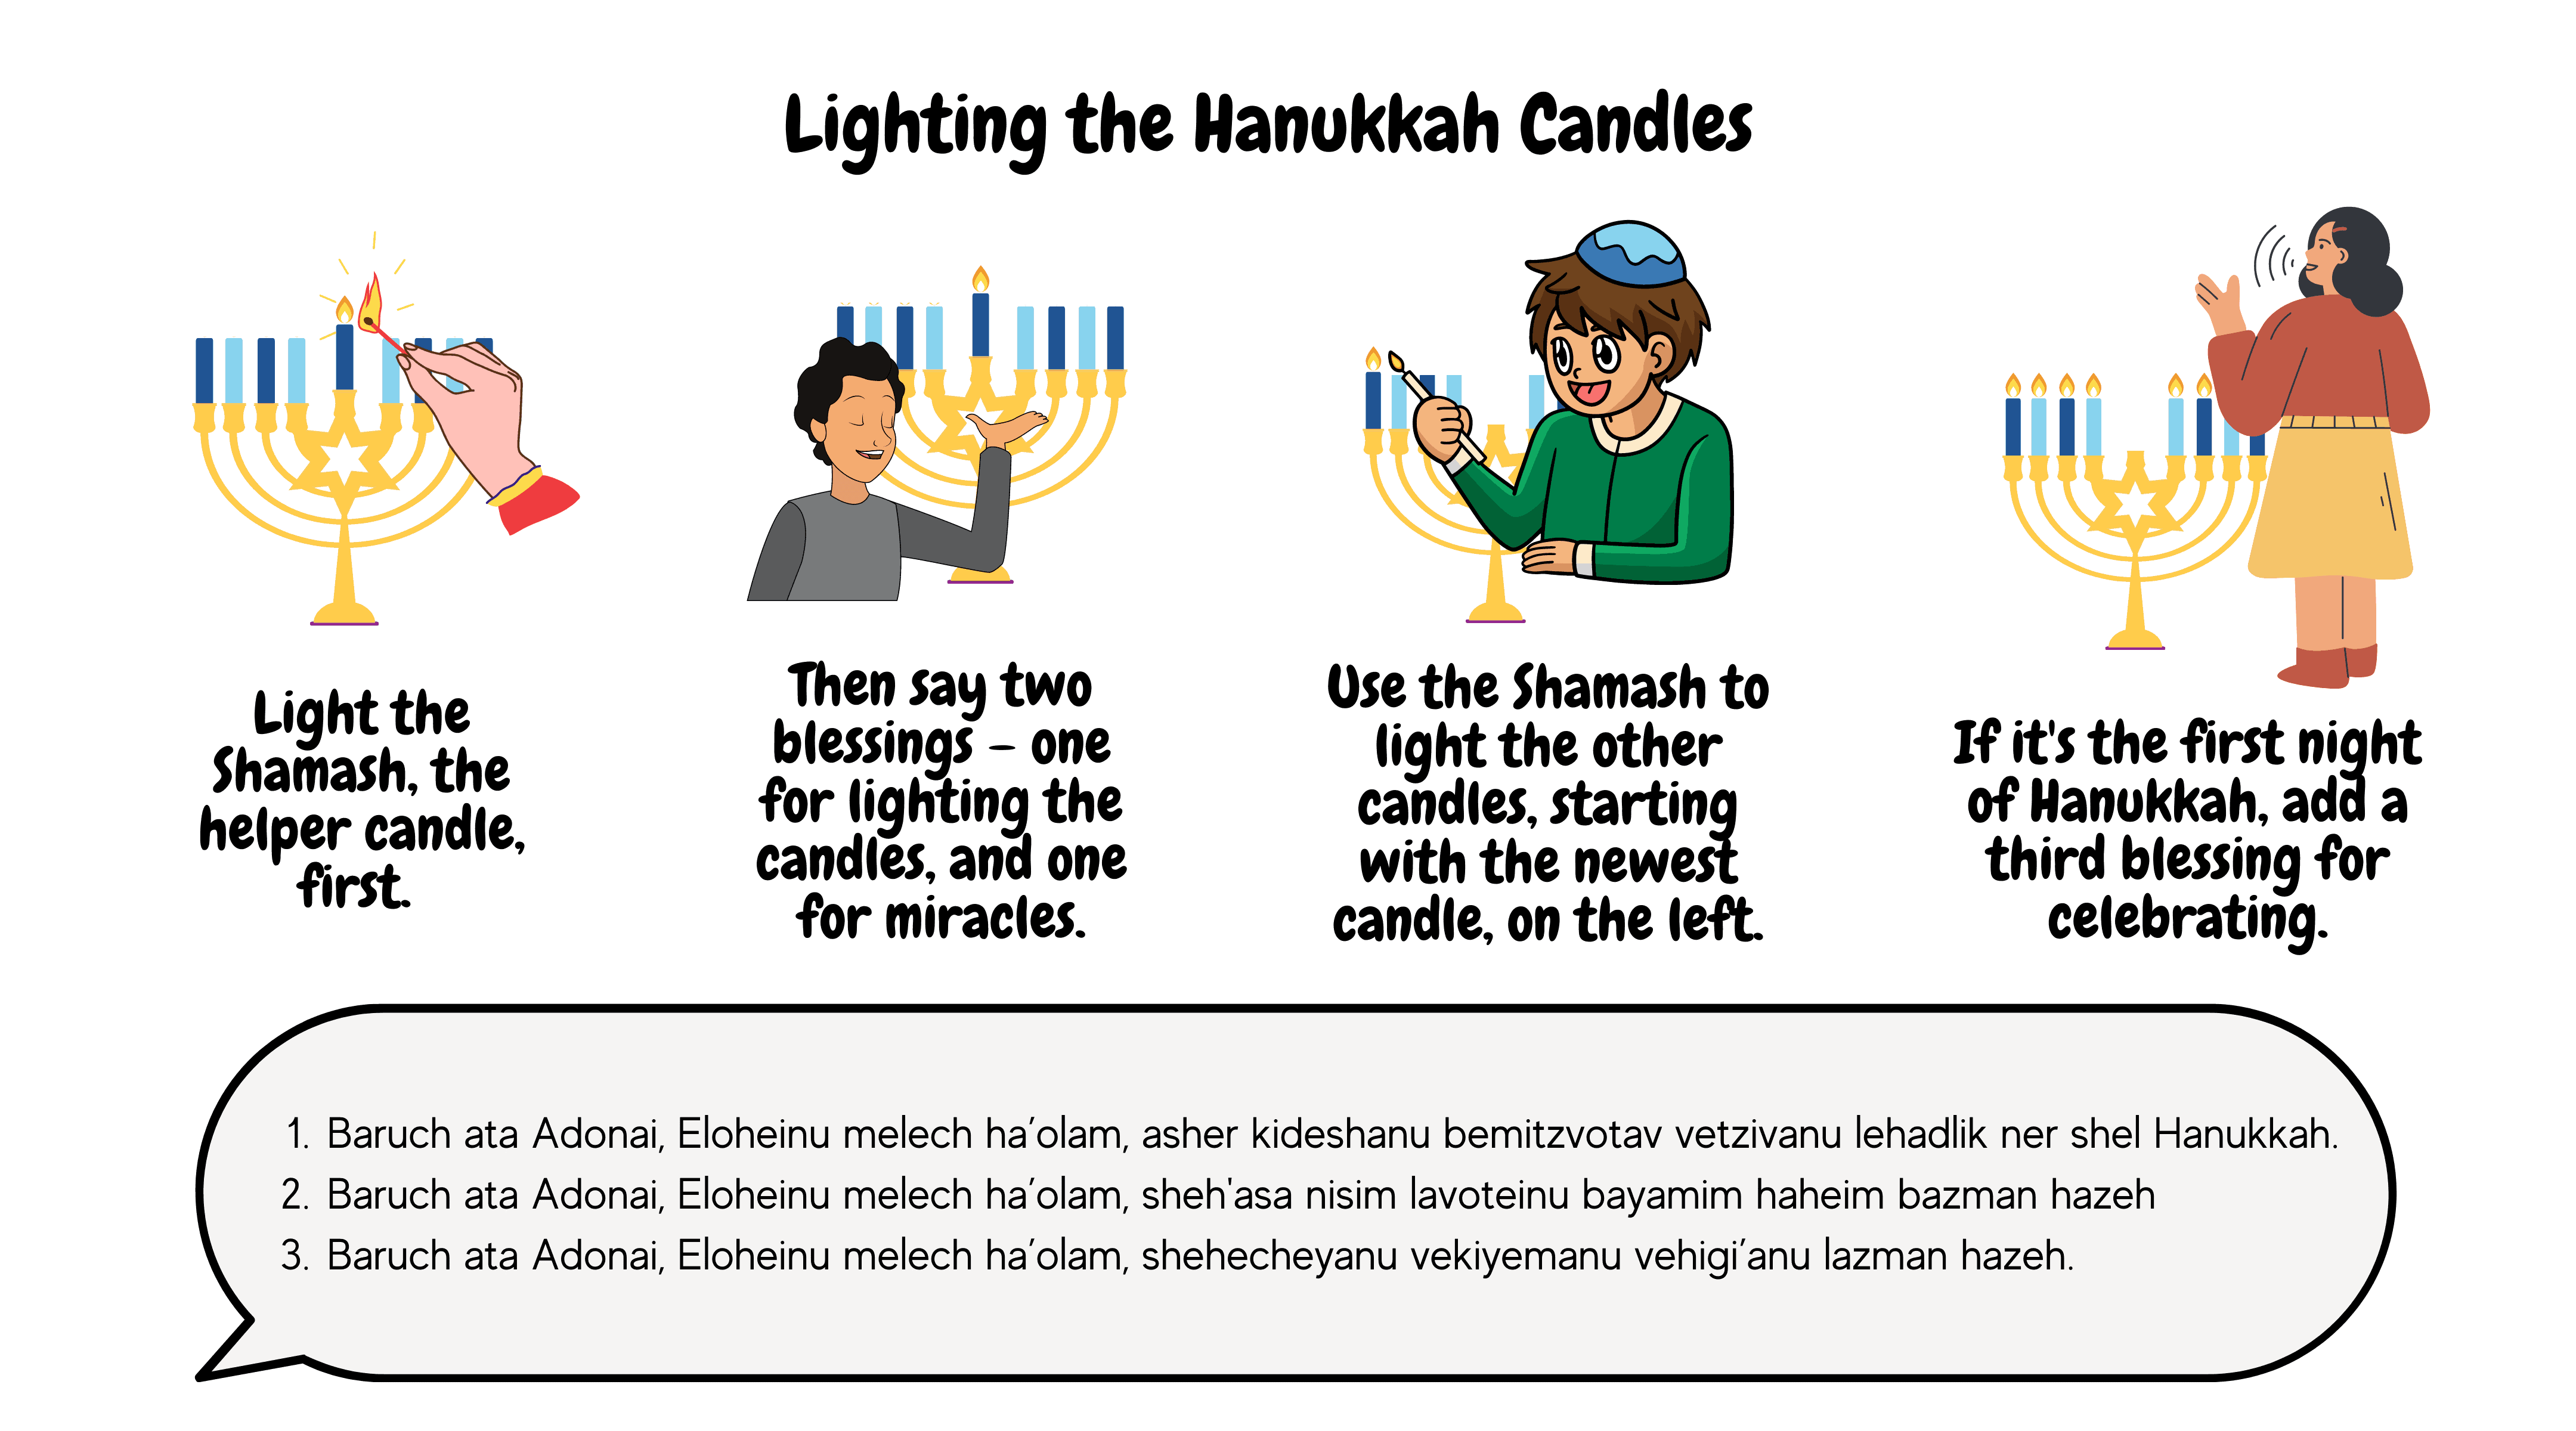 Title at the top reads "Lighting the Hanukkah Candles." Underneath are four images with captions. The first image shows a hand lighting the central candle of a menorah, with the caption "Light the shamash, the helper candle, first." The second image shows someone with their eyes closed and speaking, in front of a menorah with just the shamash lit. The caption says "Then say the two blessings - one for lighting the candles, and one for miracles." The third image shows someone using the shamash to light the other candles. The caption says "Use the shamash to light the other candles, starting with the newest candle, on the left." The fourth image shows someone facing a fully lit menorah, with the caption "If it's the first night of Hanukkah, add a third blessing for celebrating." At the bottom is a speech bubble with the transliteration of the three blessings. "1. Baruch ata adonai, eloheinu melech ha'olam, asher kidshanu bemitzvotav vetzivanu lehadlik ner shel Hanukkah. 2. Baruch ata adonai, eloheinu melech ha'olam, she'asa nisim lavoteinu bayamim haheim bazman hazeh. 3. Baruch ata adonai, eloheinu melech ha'olam, shehechiyanuy vekiyemanu vehigi'anu lazman hazeh."